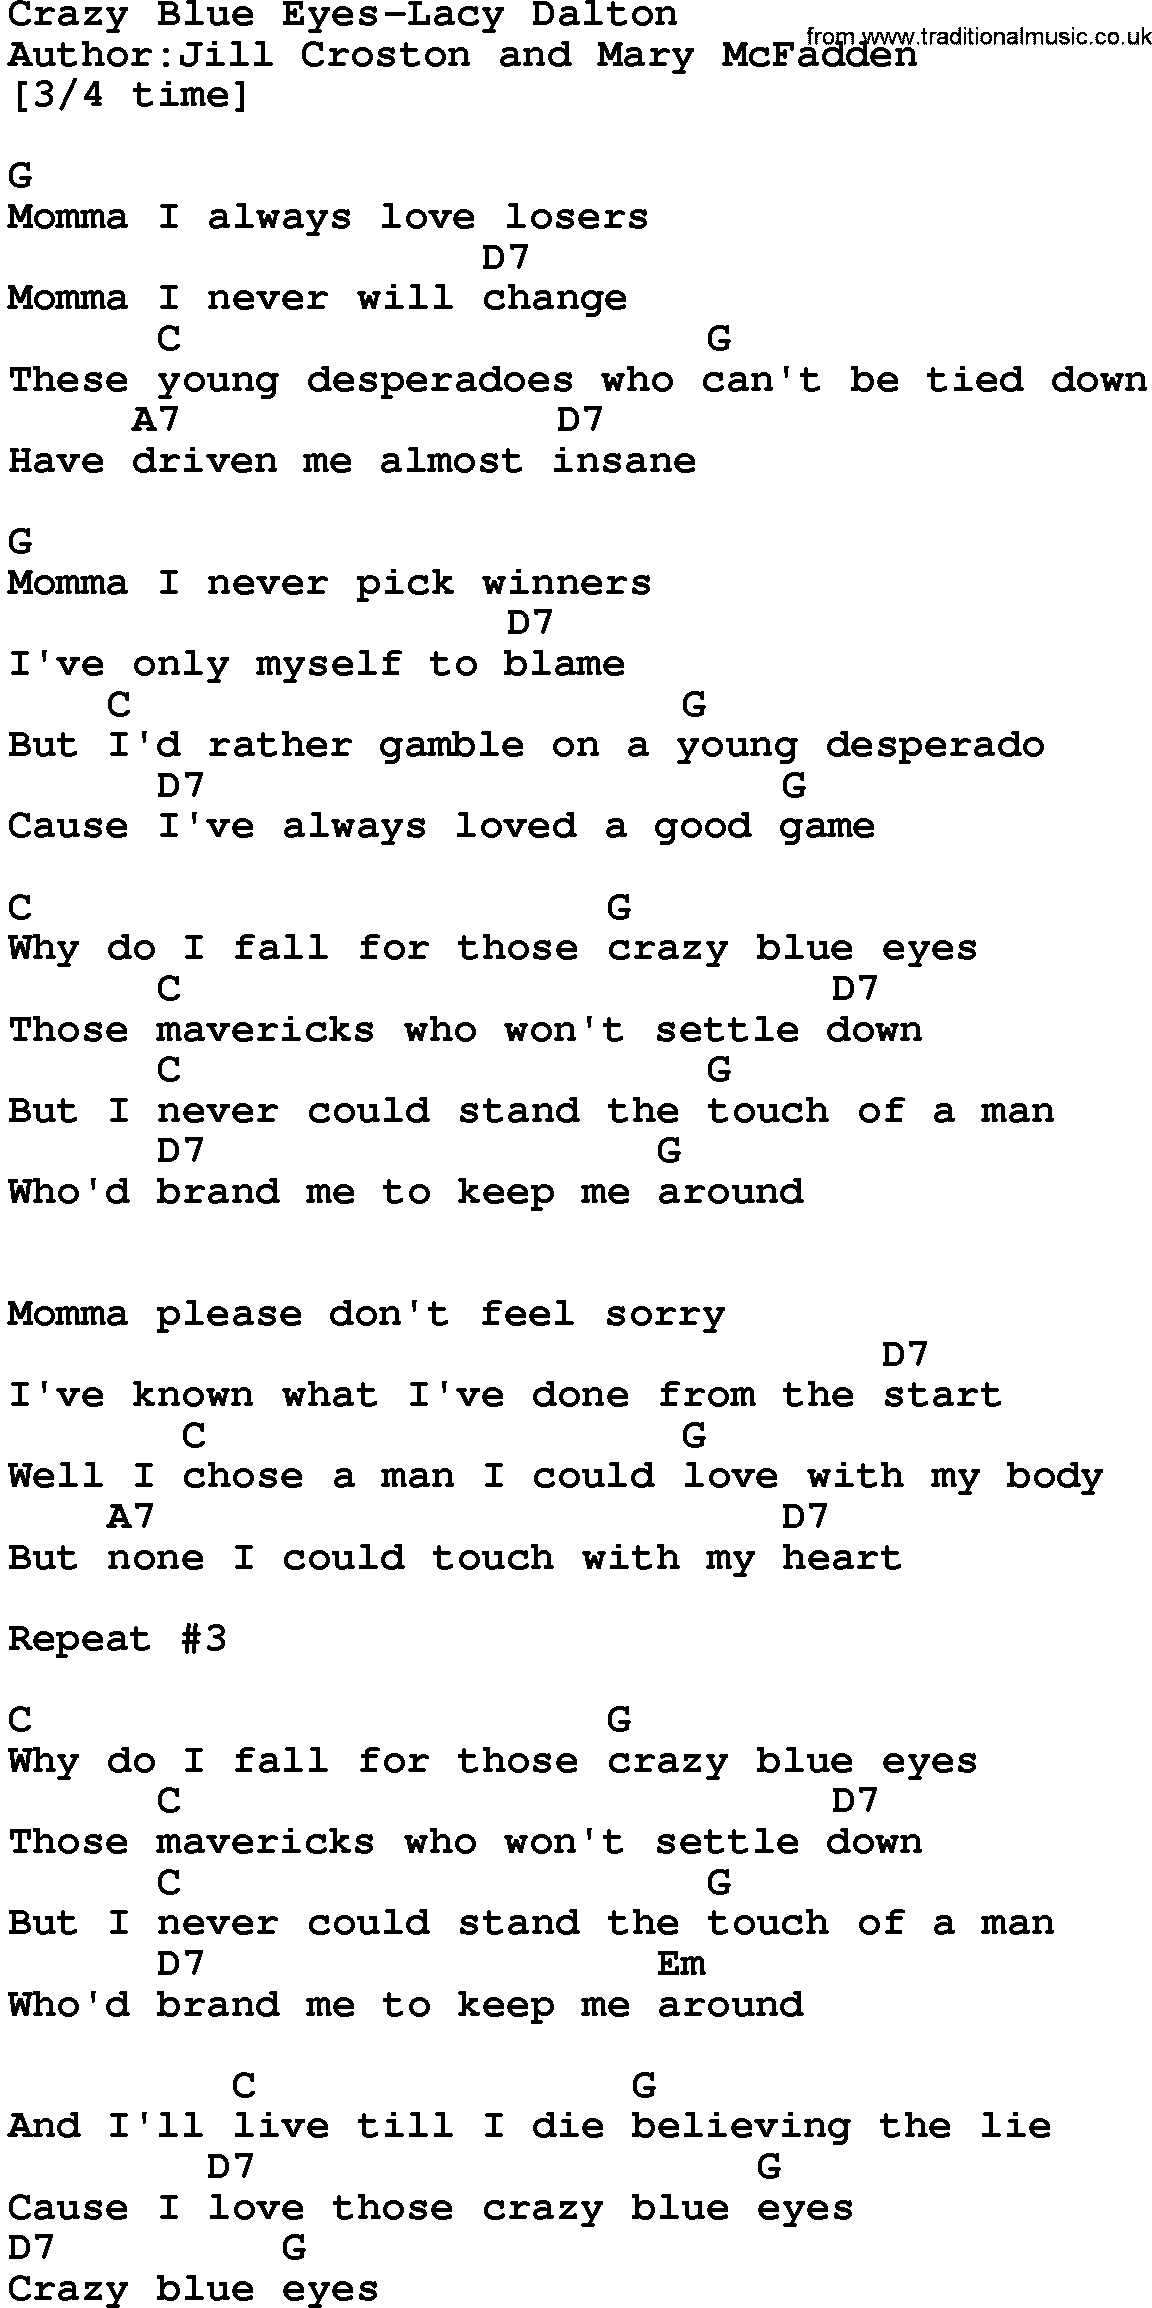 Country music song: Crazy Blue Eyes-Lacy Dalton lyrics and chords